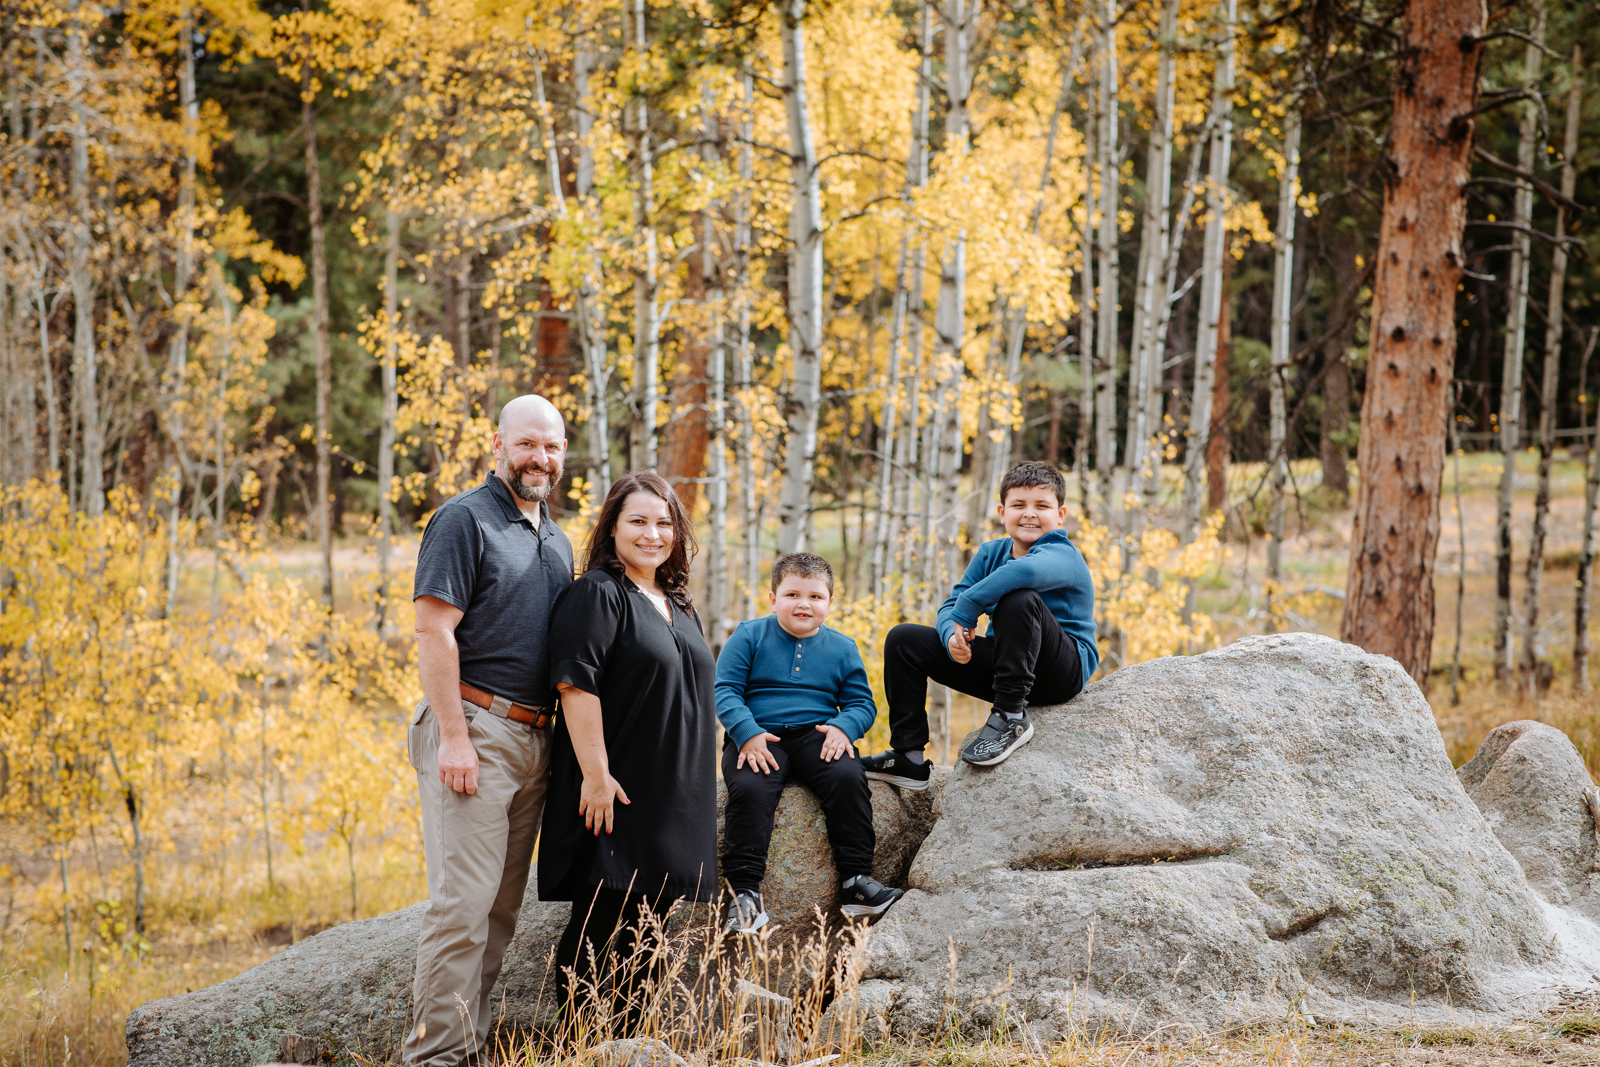 Formal family photos during photo session at Meyer Ranch Park